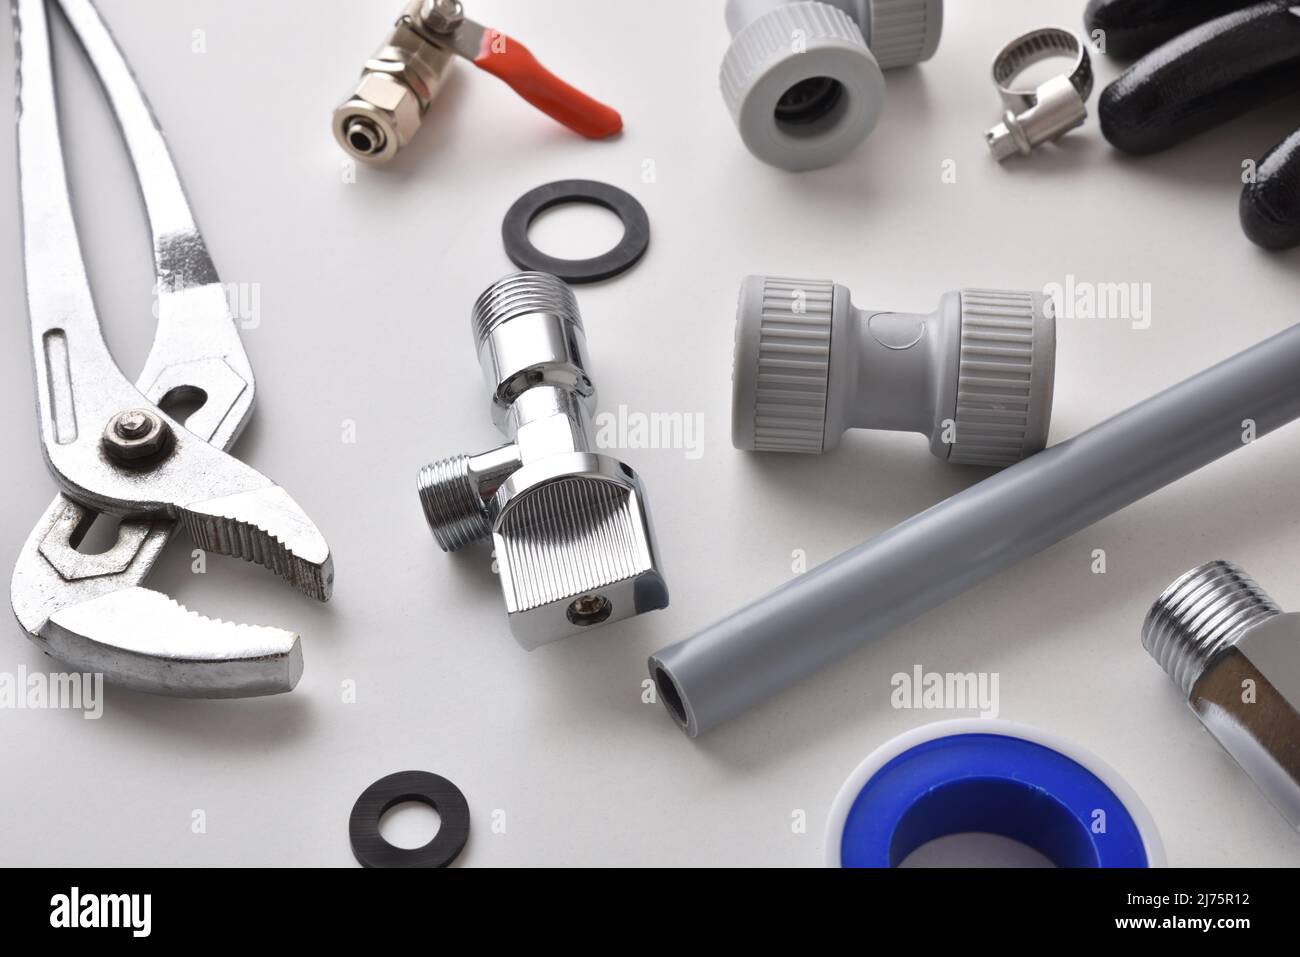 Detail of group of plumbing equipment on white workbench. Elevated view. Horizontal composition. Stock Photo